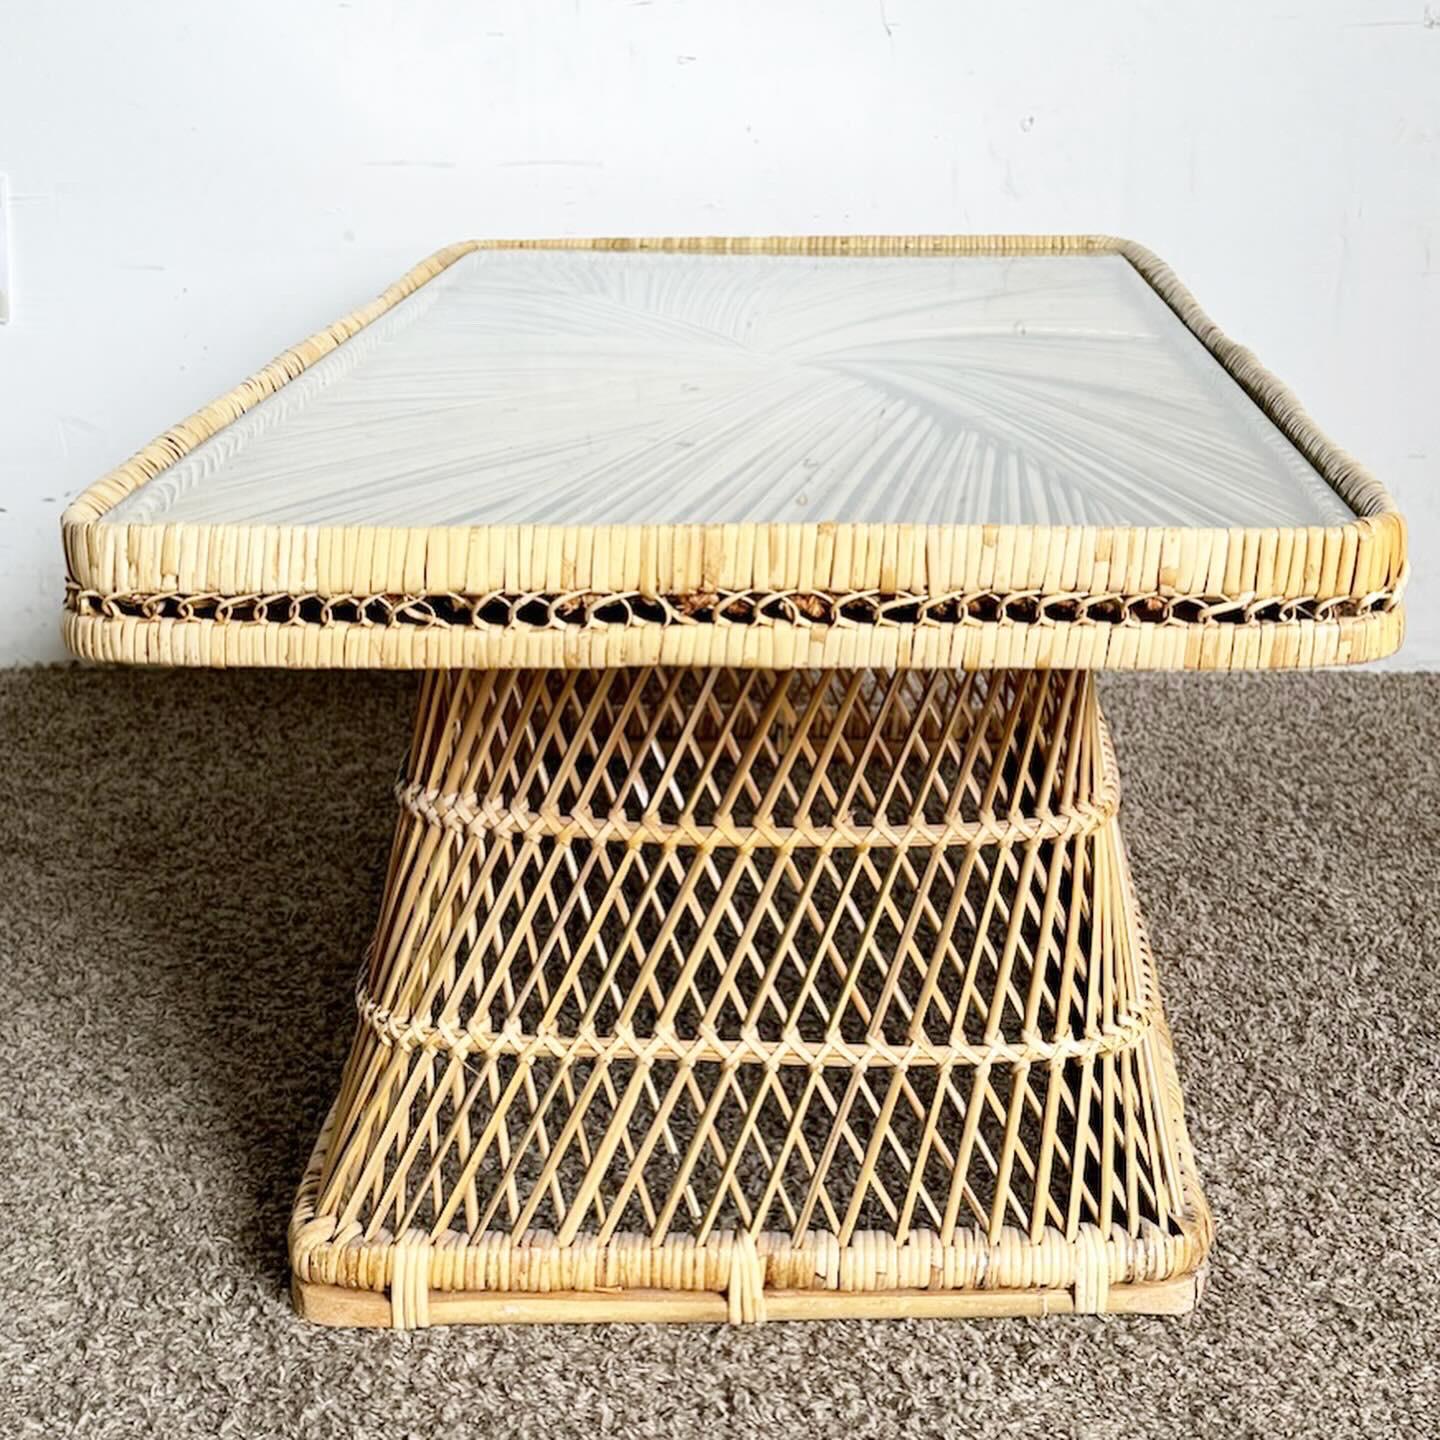 Bring a natural, bohemian vibe to your home with the Boho Chic Buri Rattan Glass Top Rectangular Coffee Table. This table combines the organic beauty of Buri rattan with a sleek glass top, offering both style and functionality. Its rectangular shape